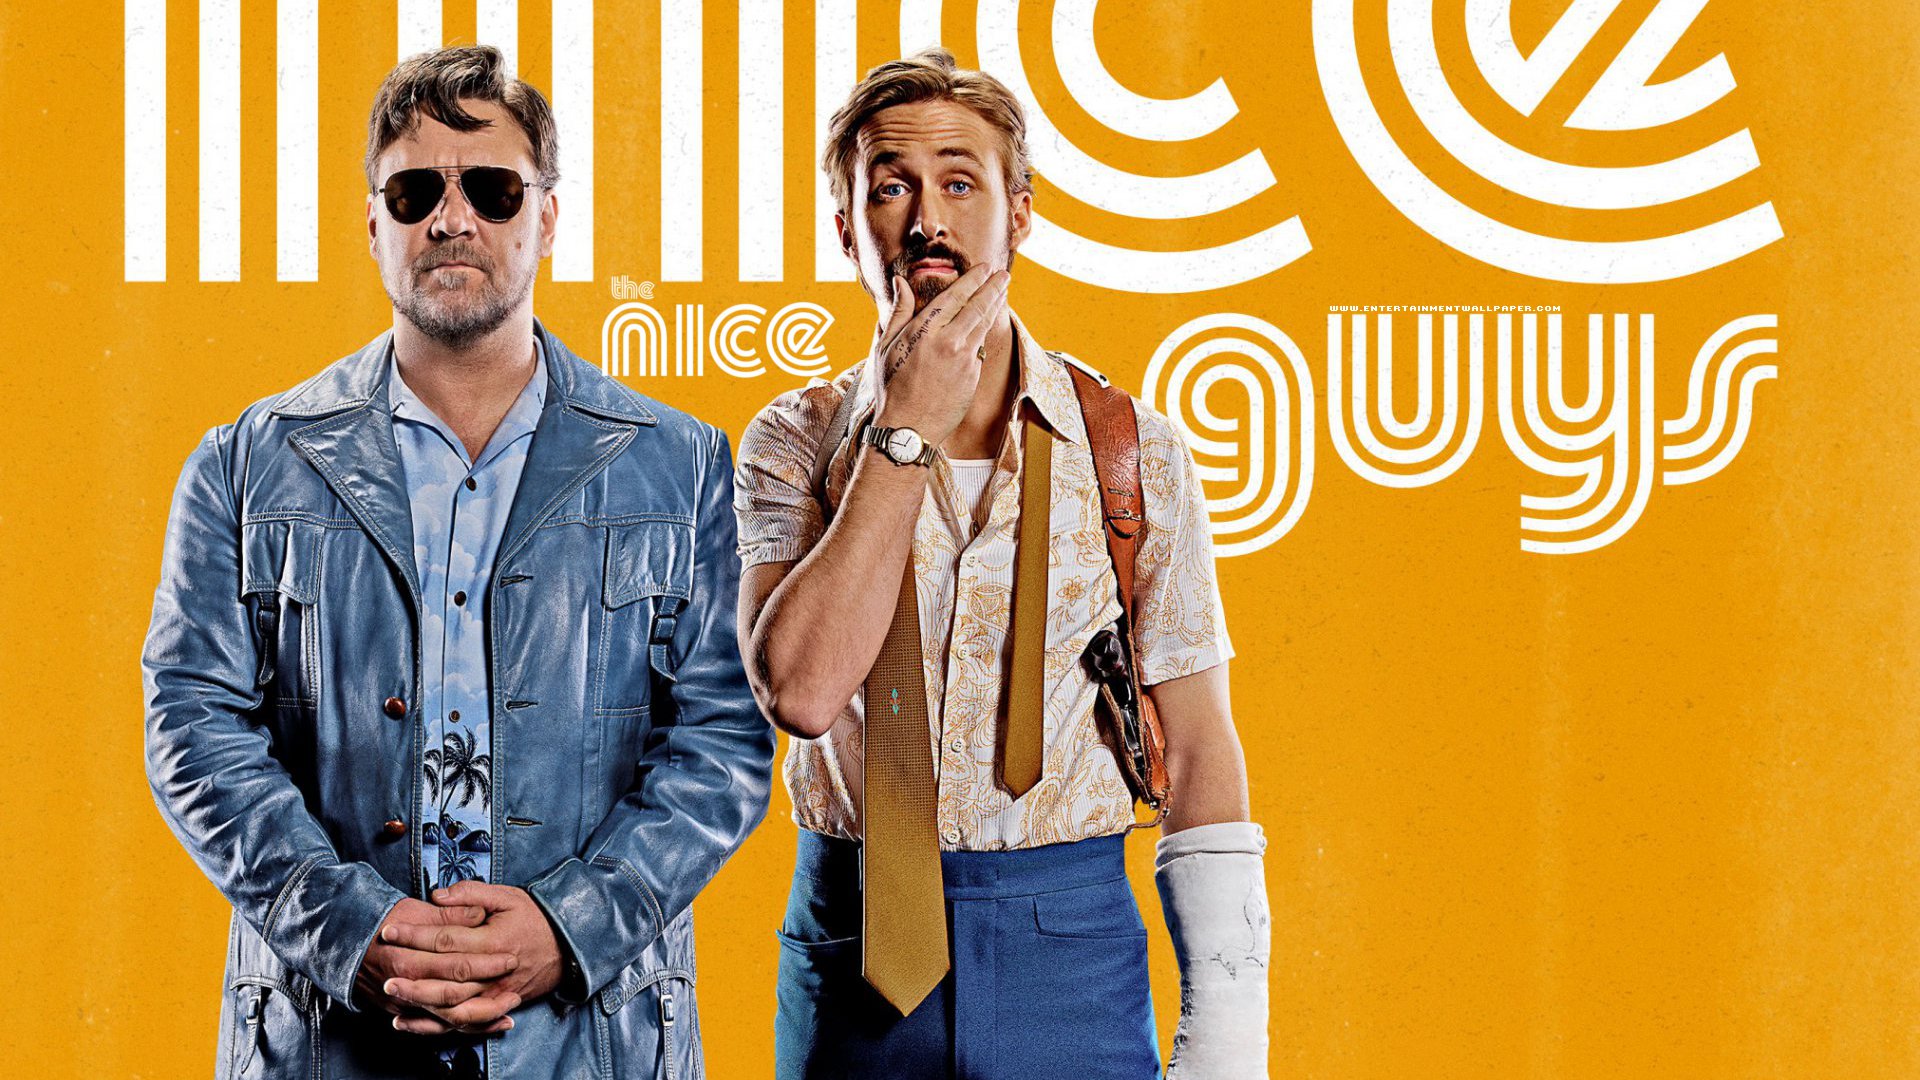 Amazing The Nice Guys Pictures & Backgrounds